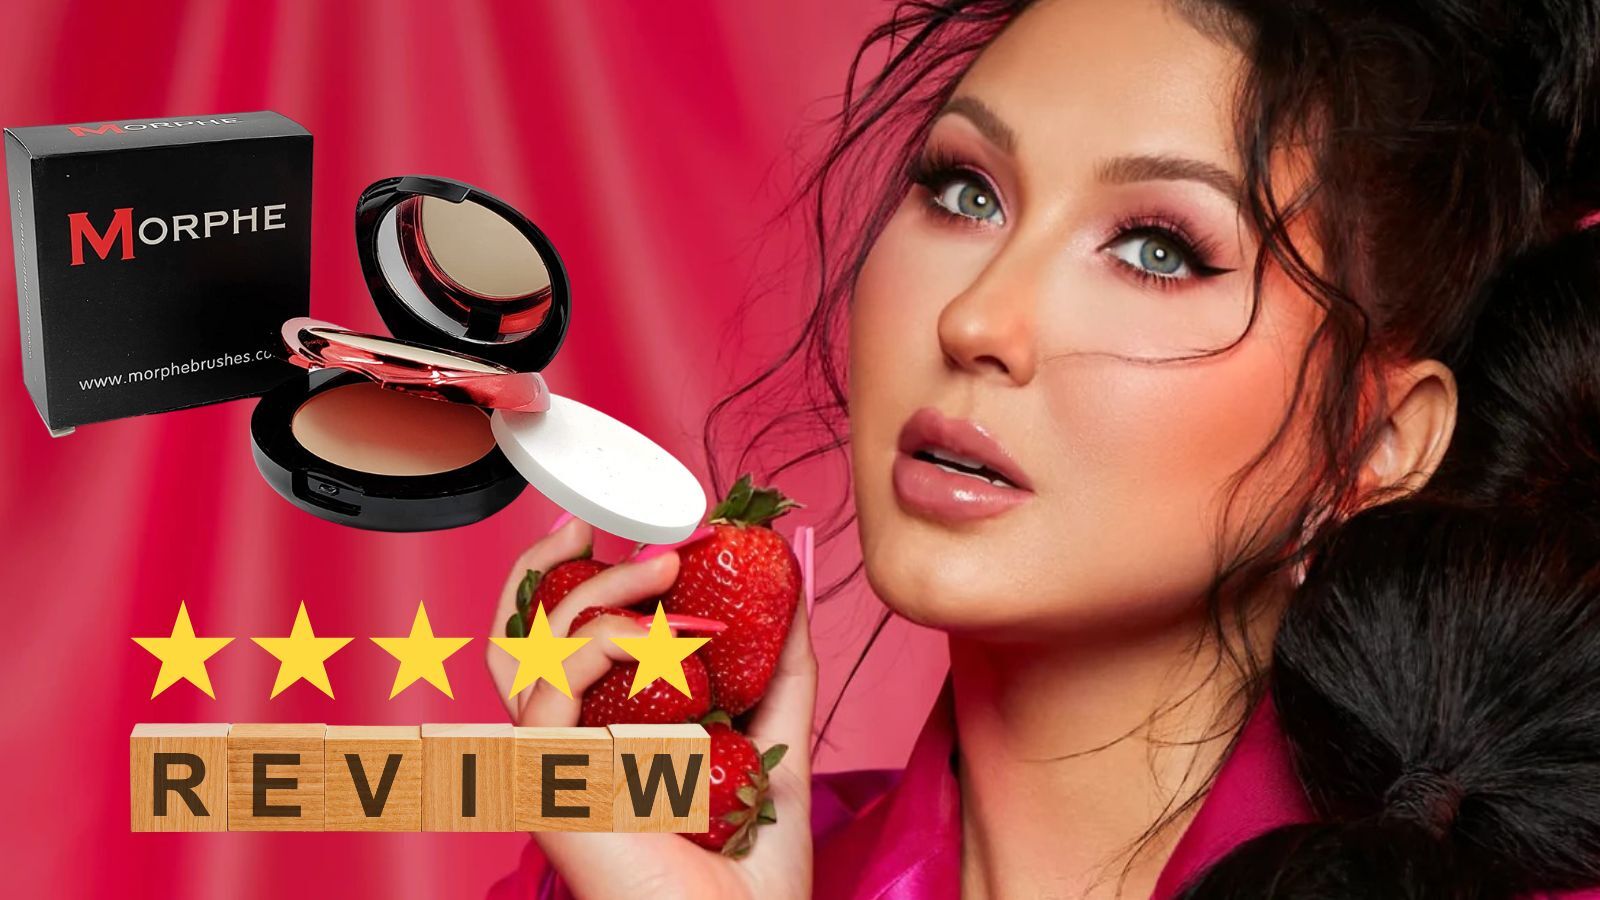 Morphe Review: *Pros and Cons* Why Is It So Popular?